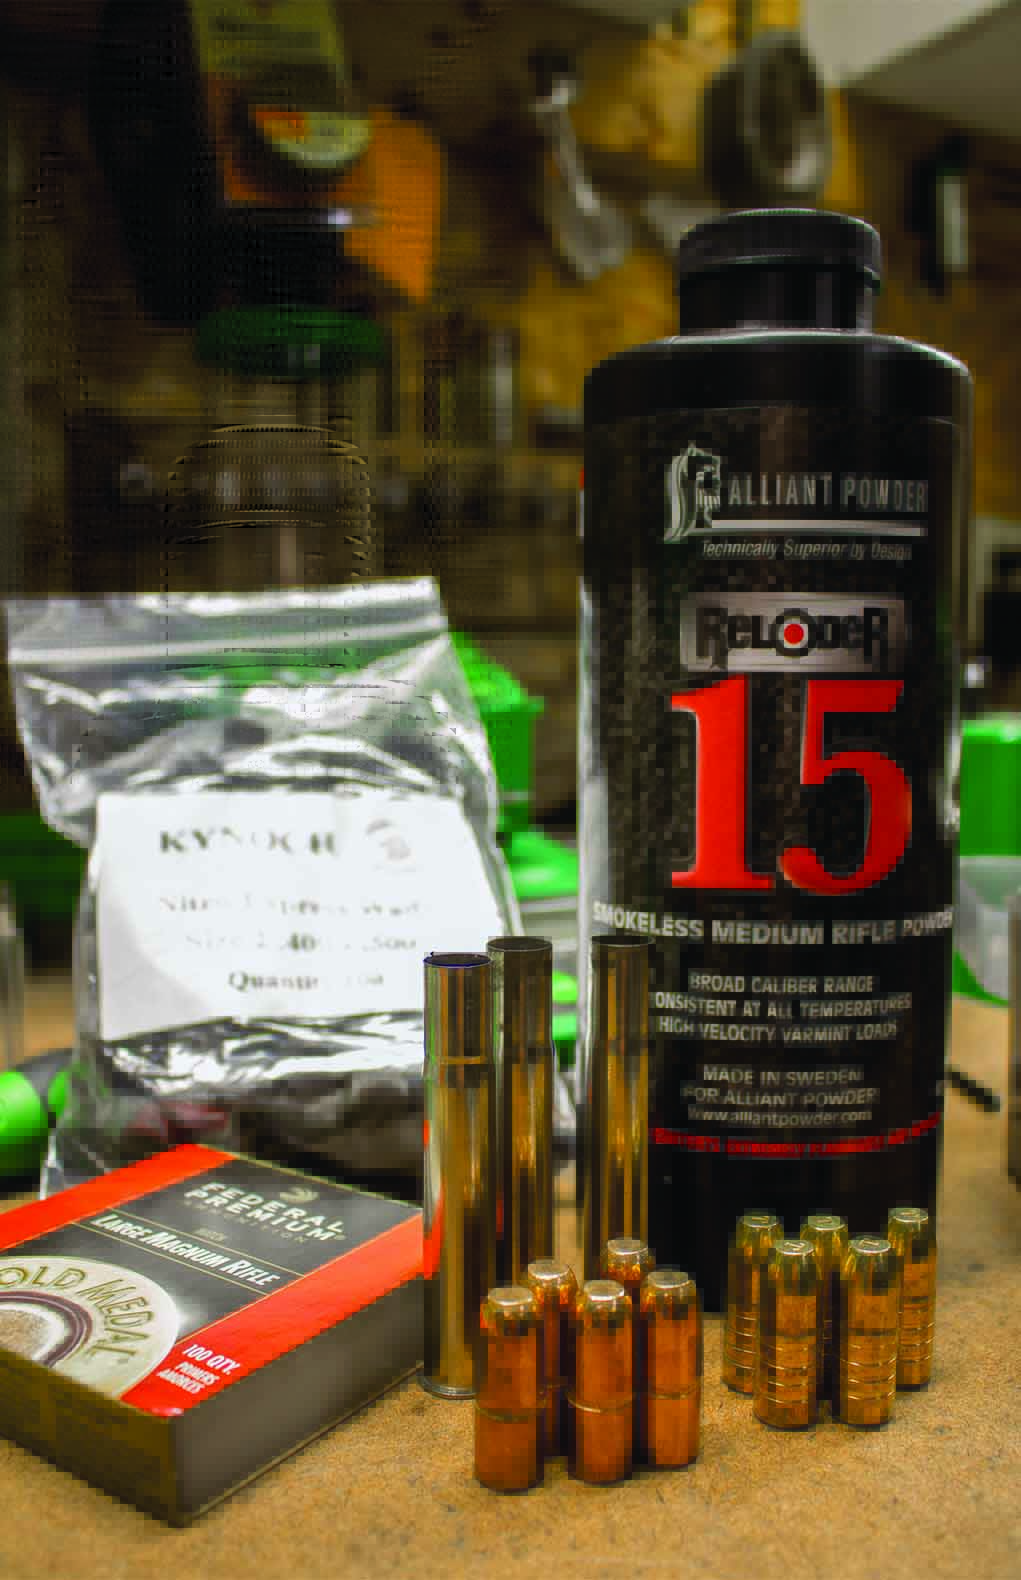 The expense of factory-loaded safari ammunition, alone, warrants handloading for the big-bore cartridges. The author’s .470 NE runs best with handloaded ammo.